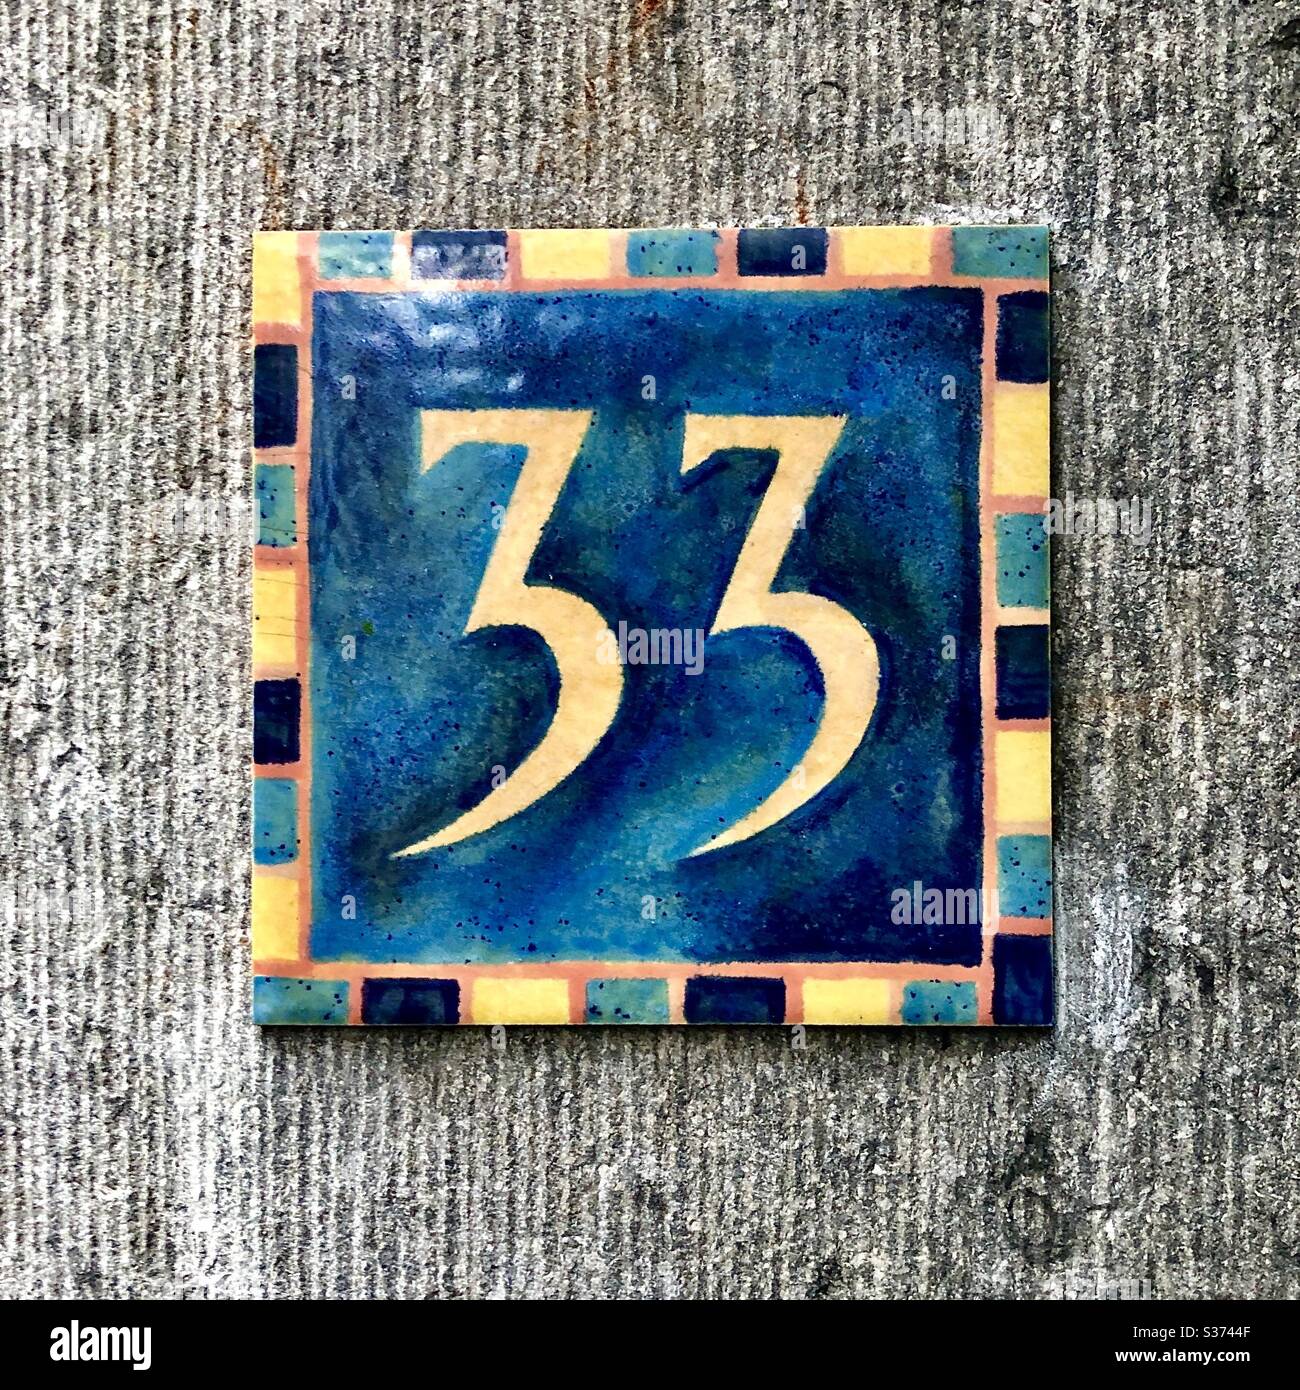 Hand-made ceramic tile “33” house number on street in Brussels, Belgium. Stock Photo